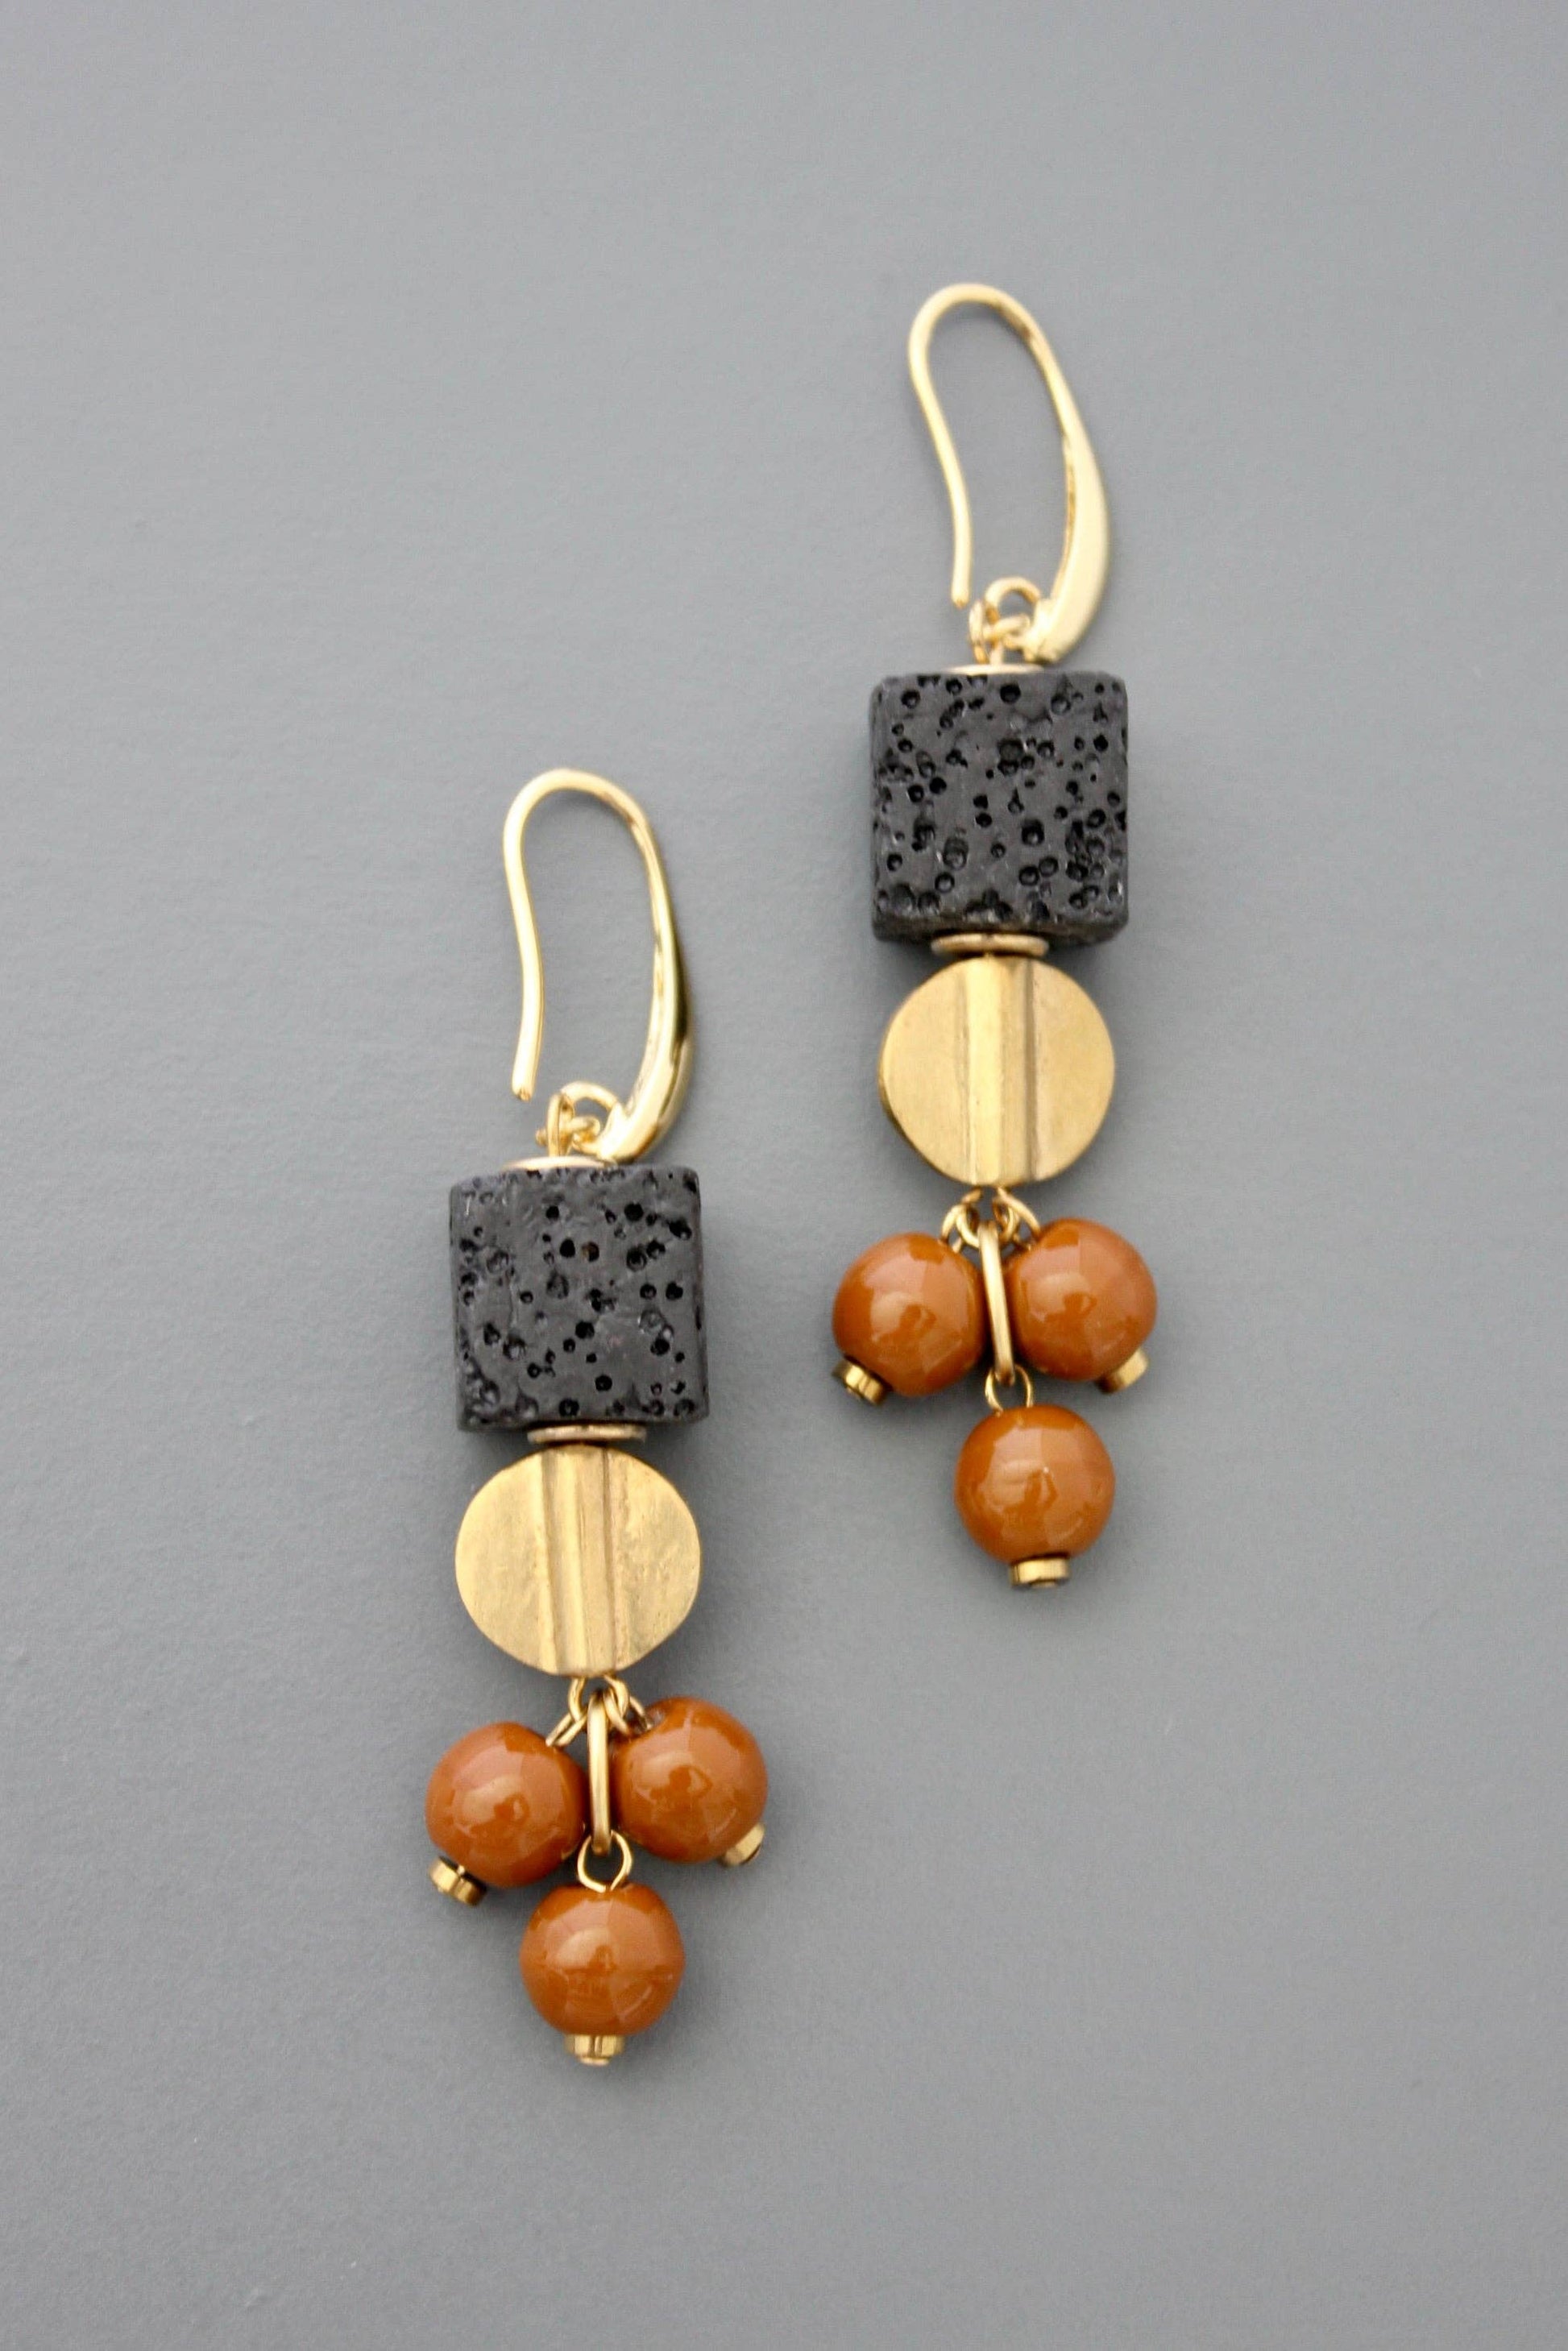 Gold plated brass hooks with lava and glass beads against a grey background